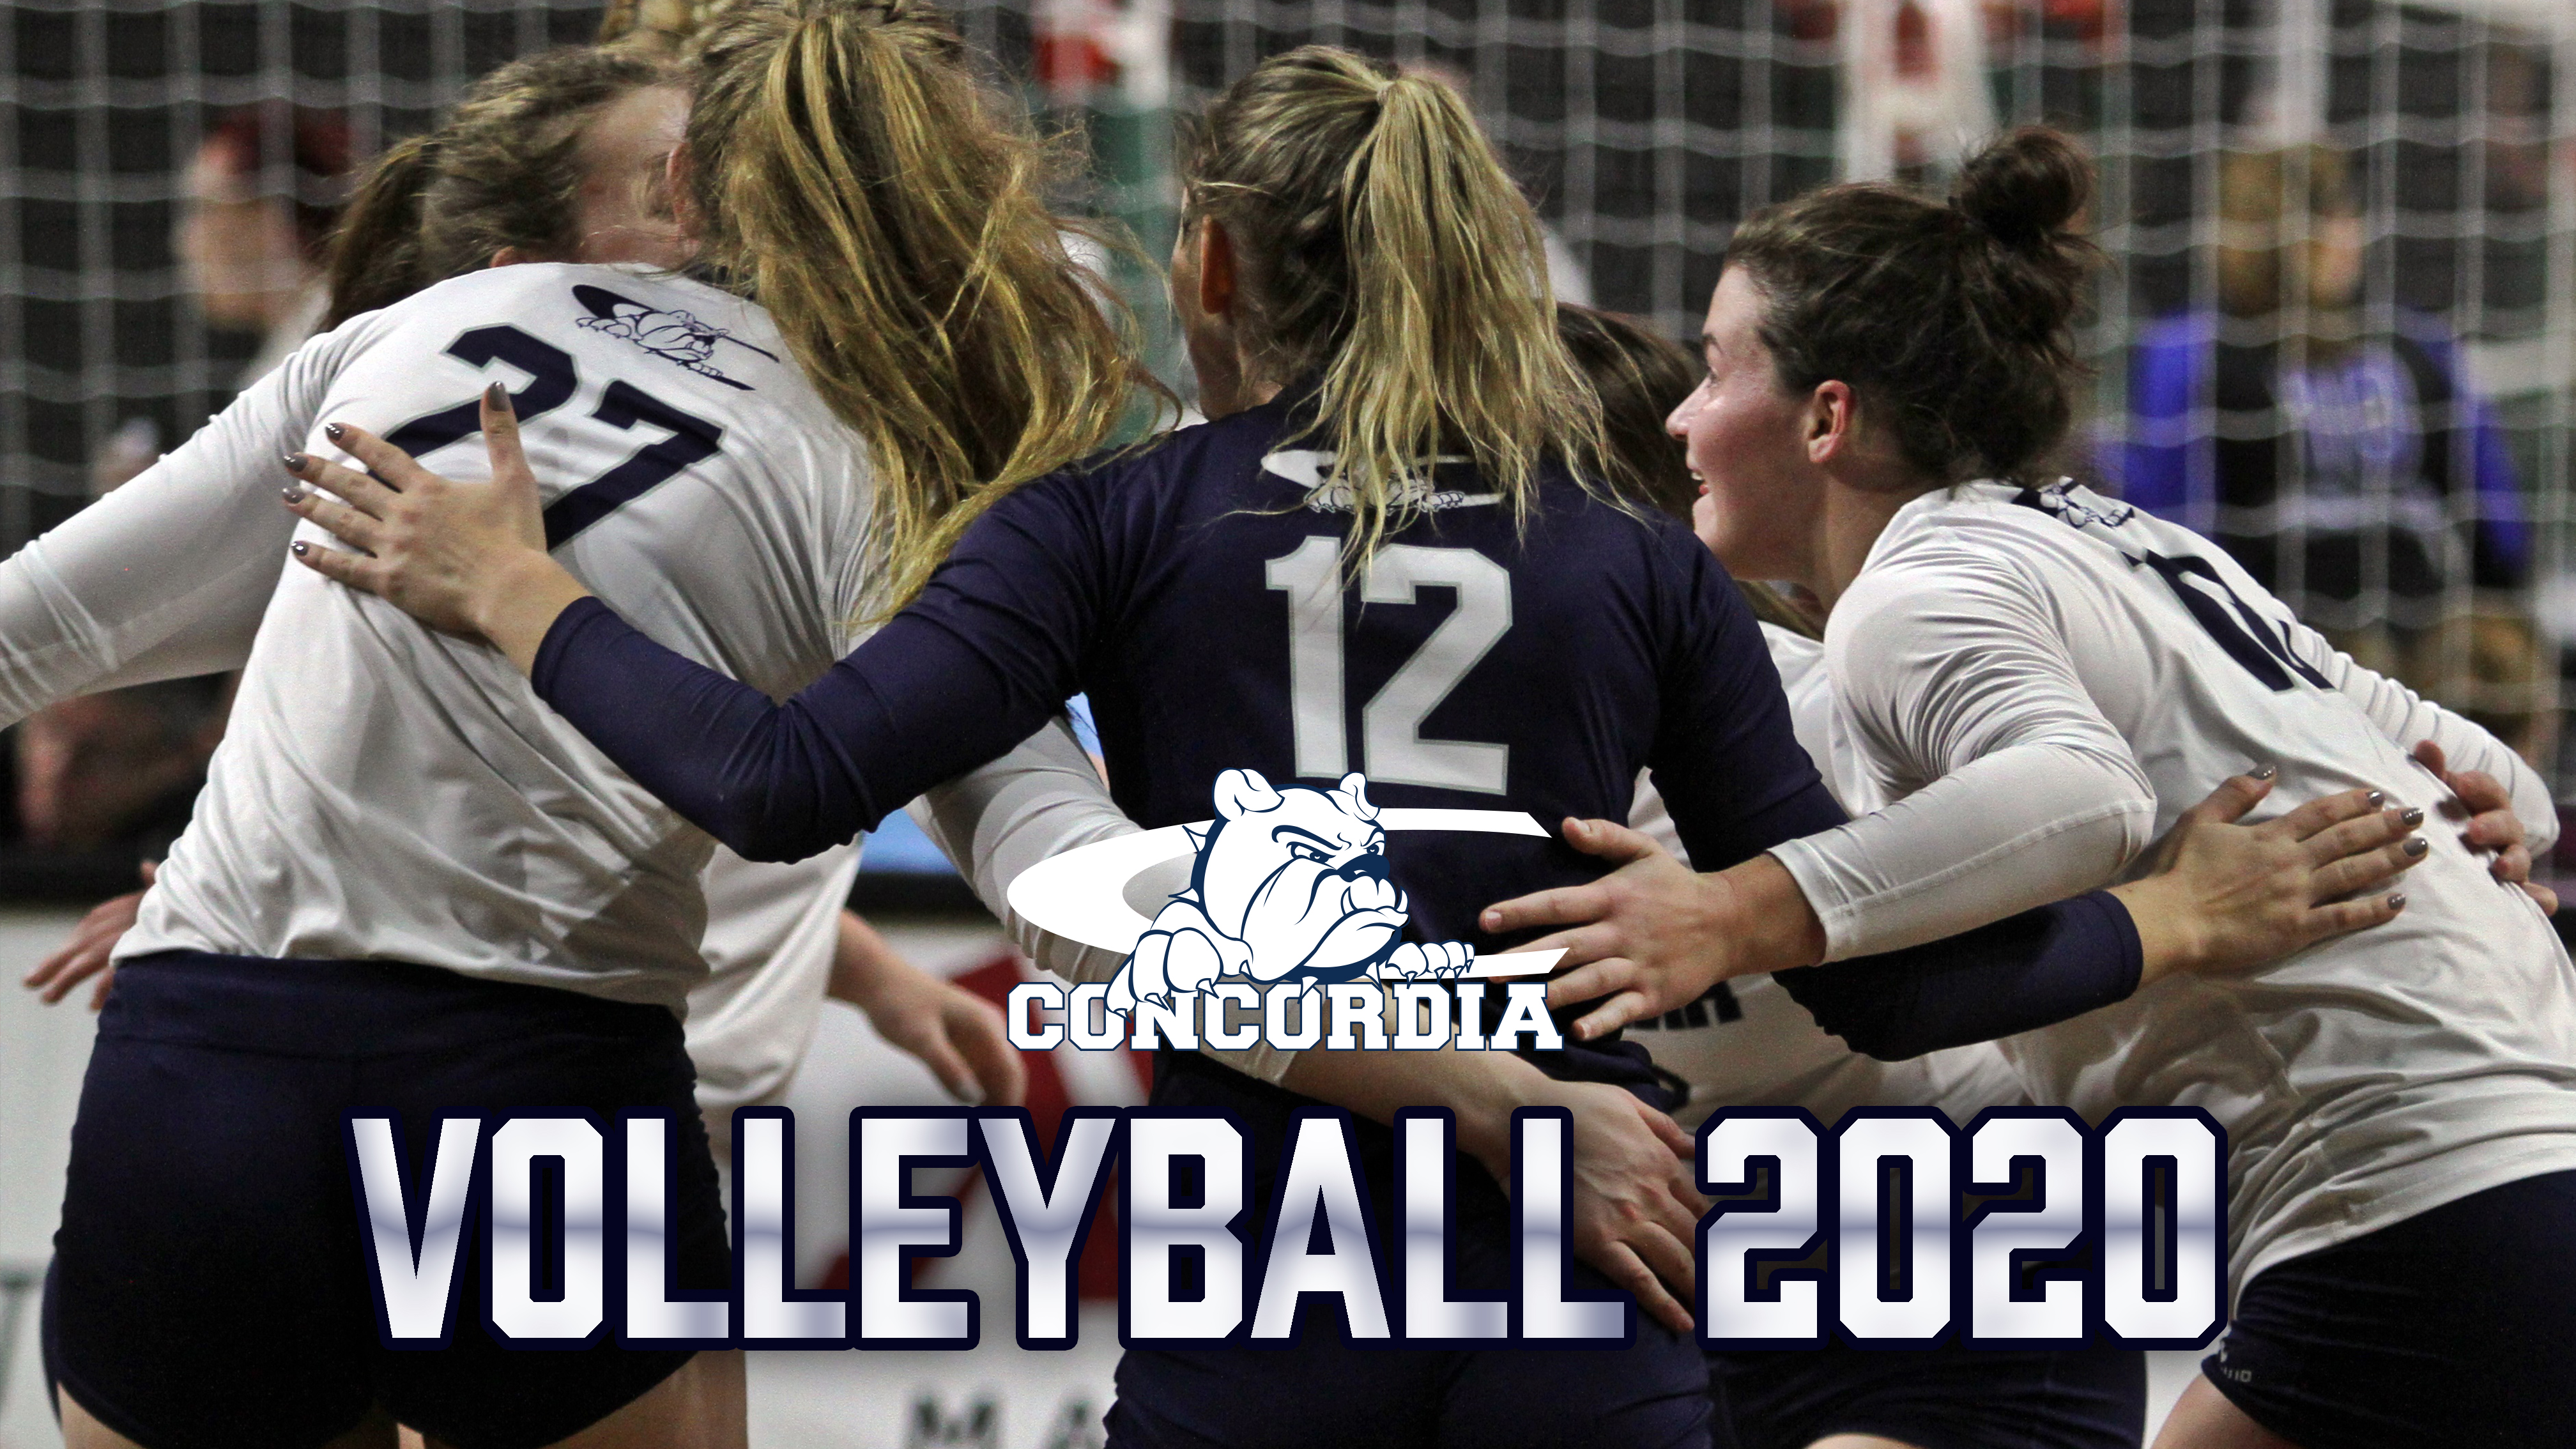 2020 volleyball schedule unveiled, features 22 varsity dates :: Volleyball :: Concordia